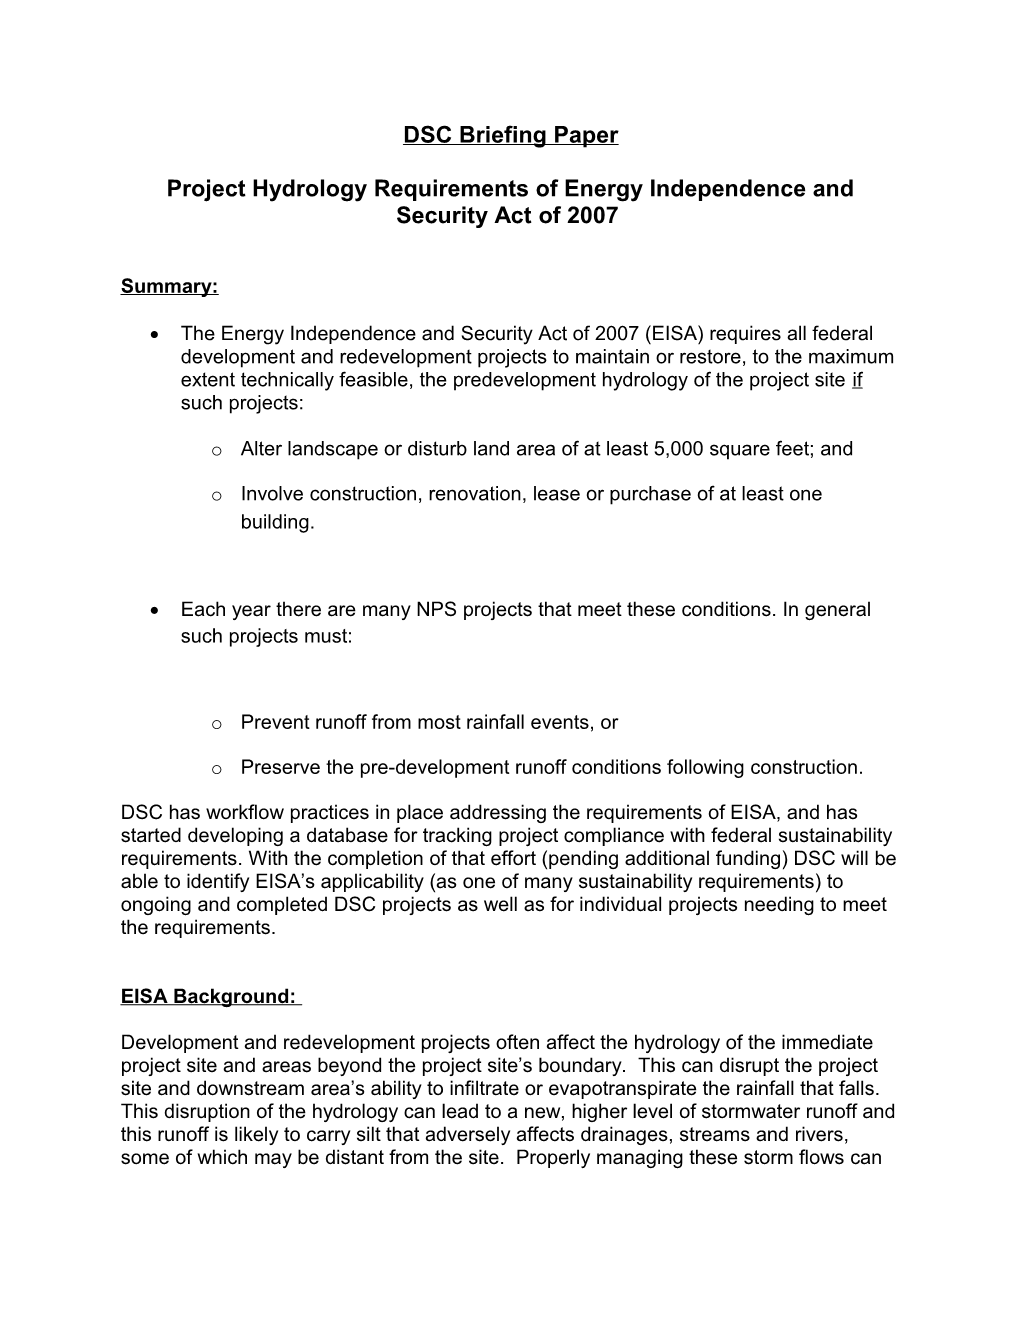 DSC Briefing Paper - Project Hydrology Requirements of Energy Independence and Security